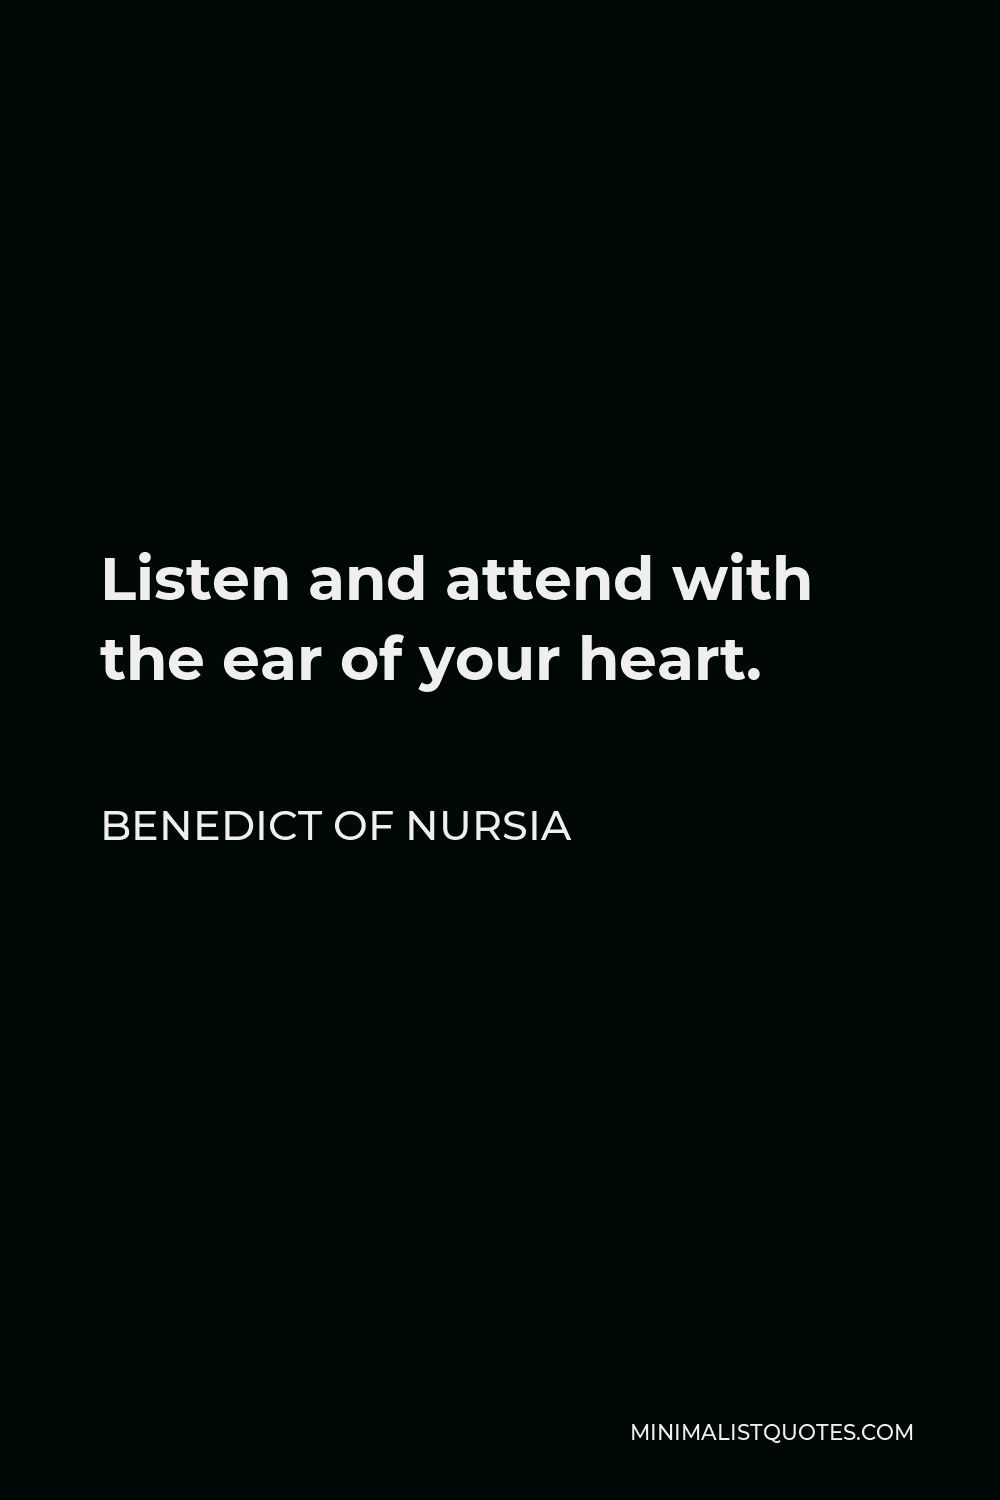 Benedict of Nursia Quote - Listen and attend with the ear of your heart.